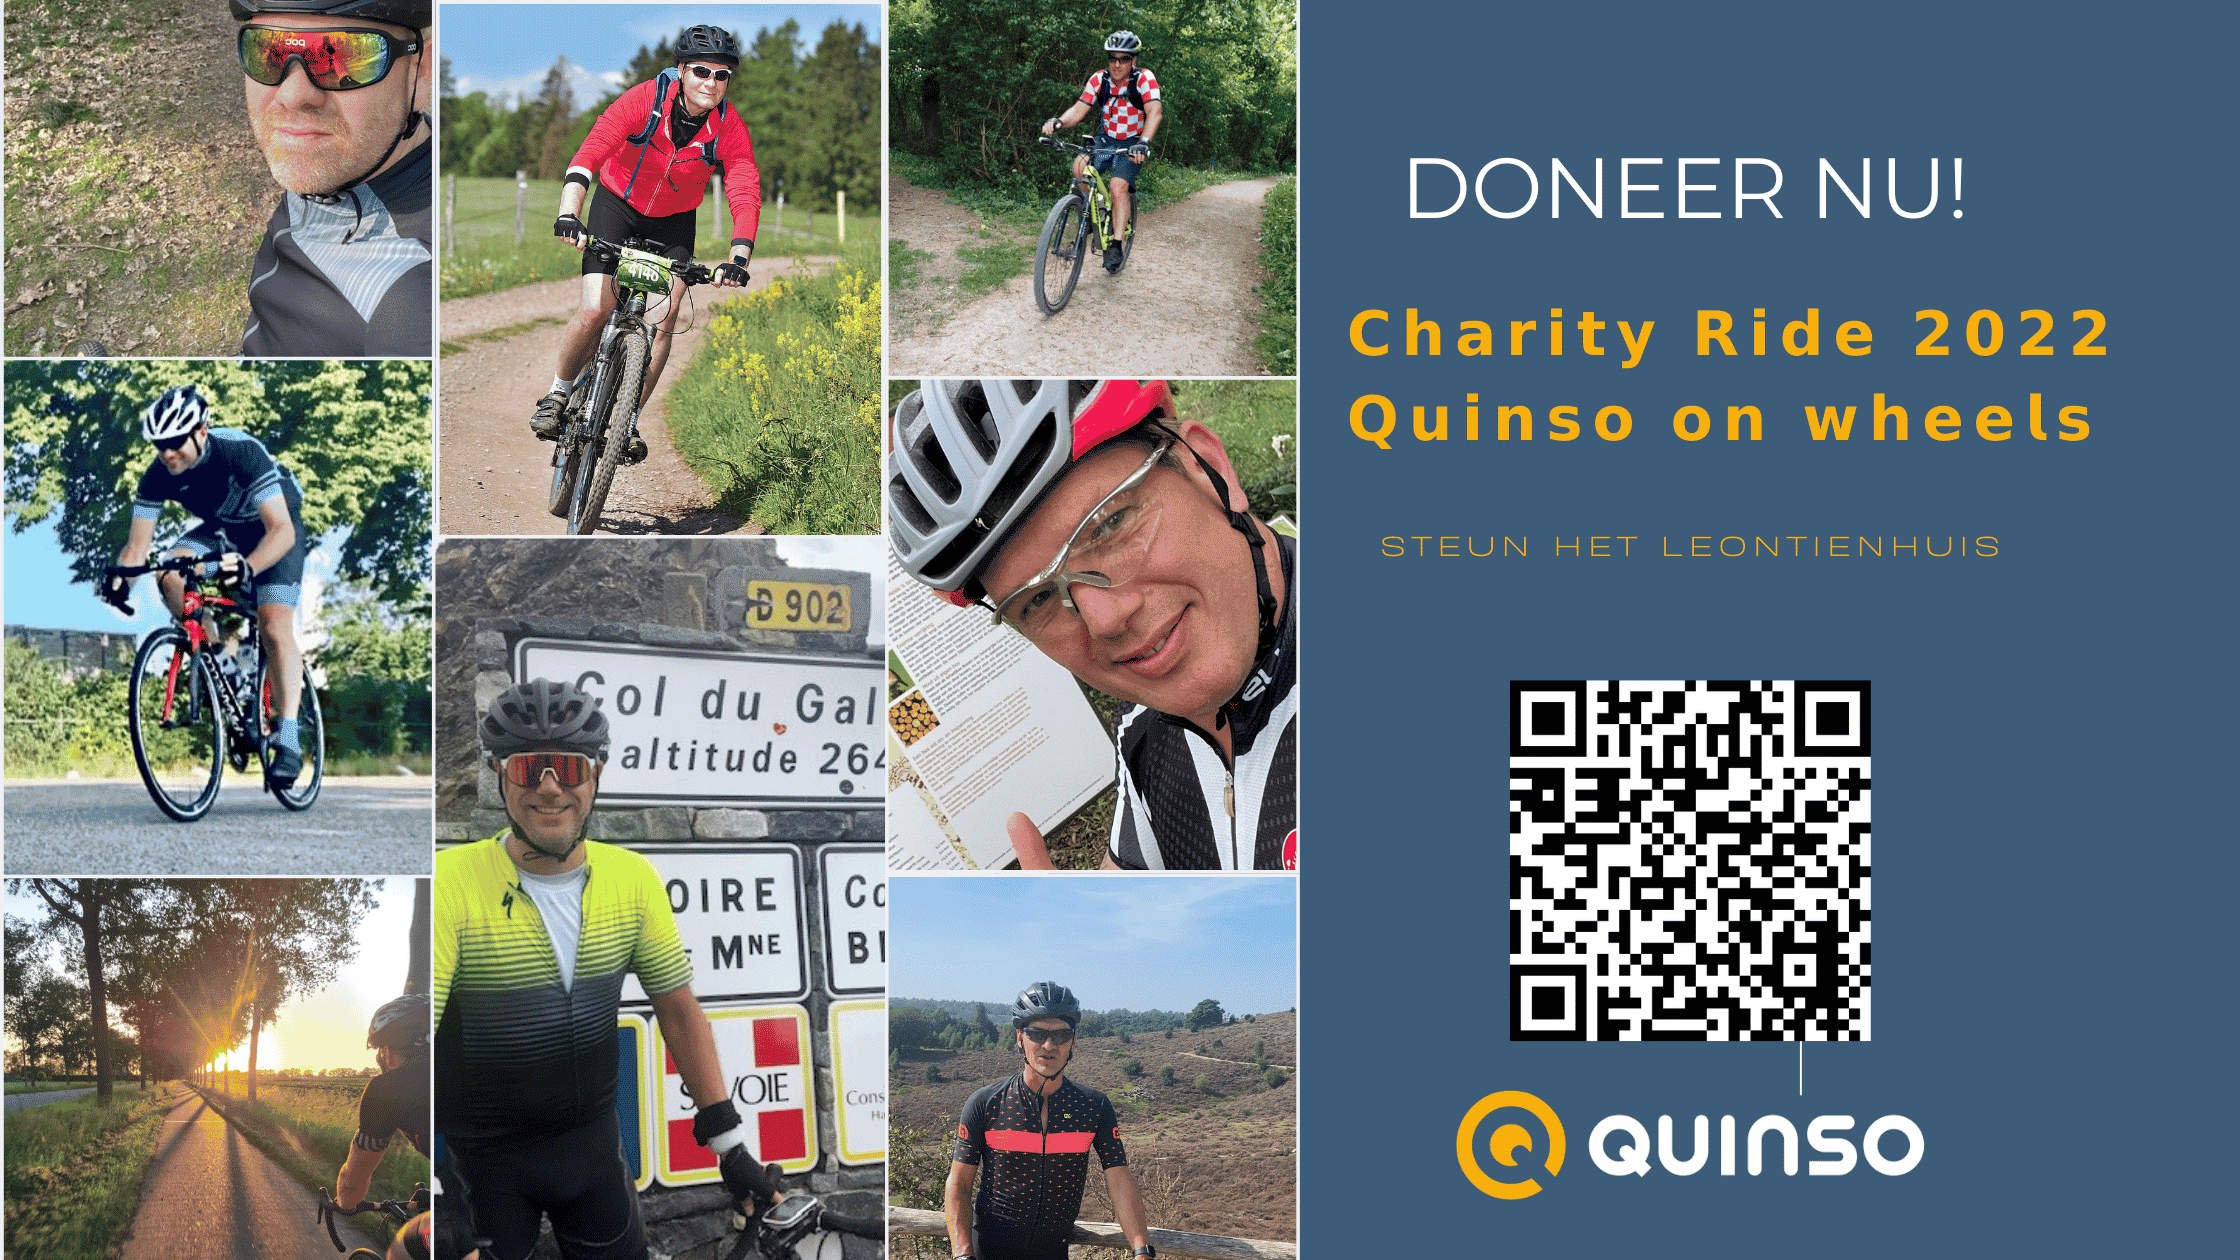 Charity Ride 2022 | Quinso on wheels